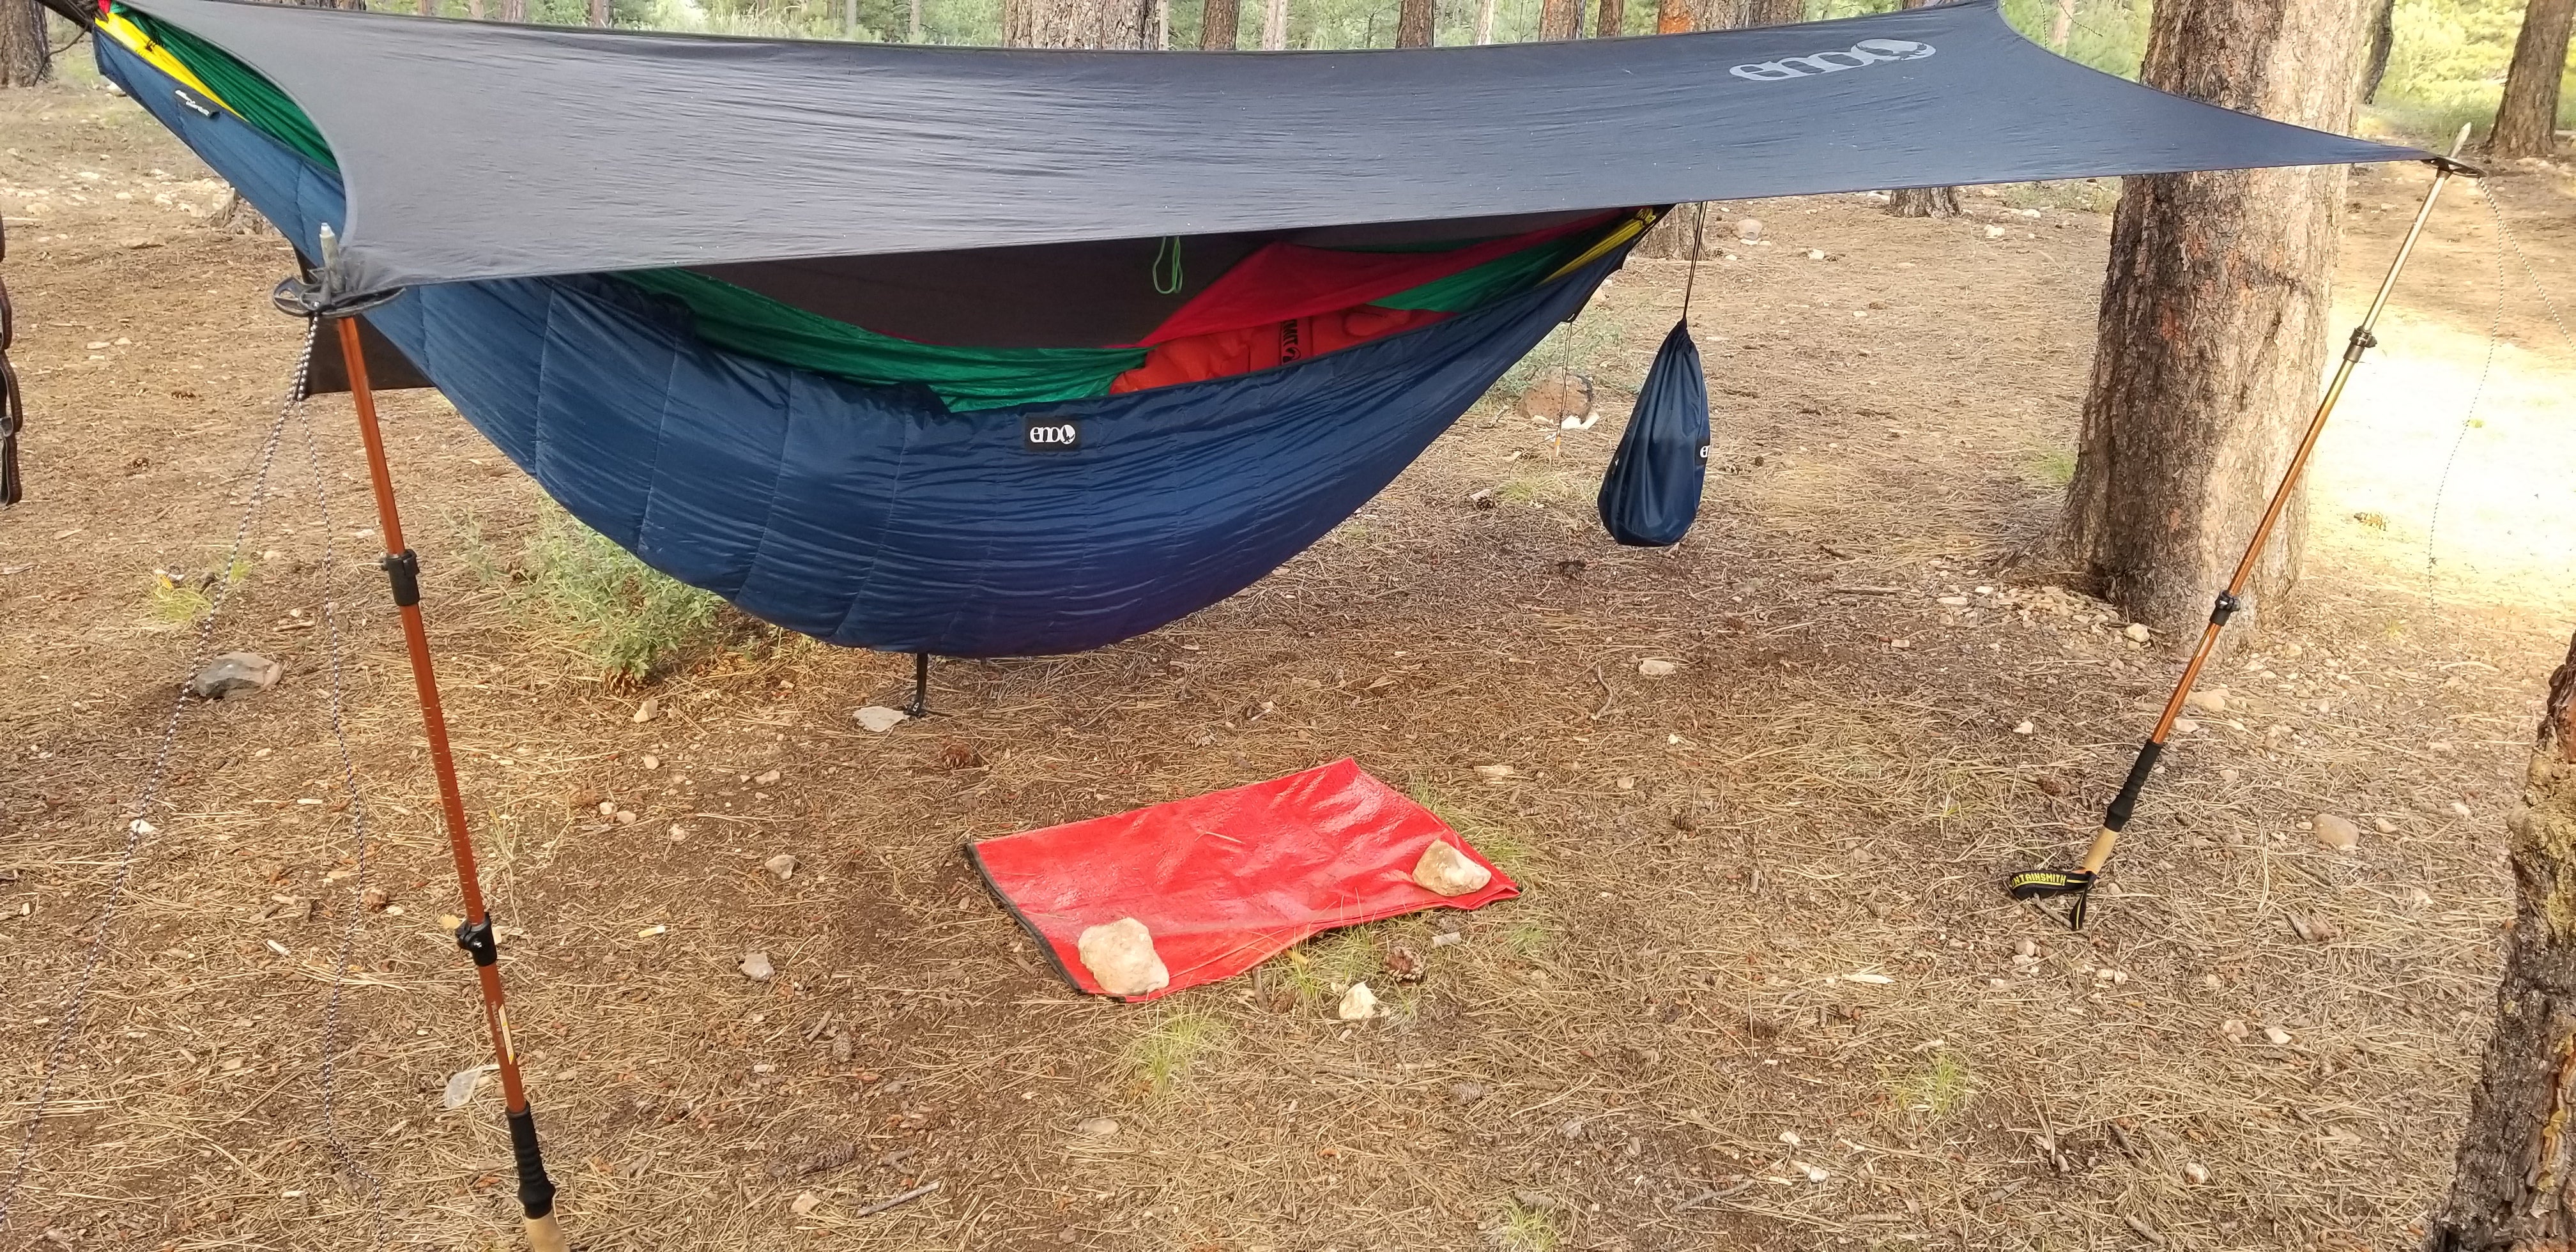 Wonderful hammock camping in the pines